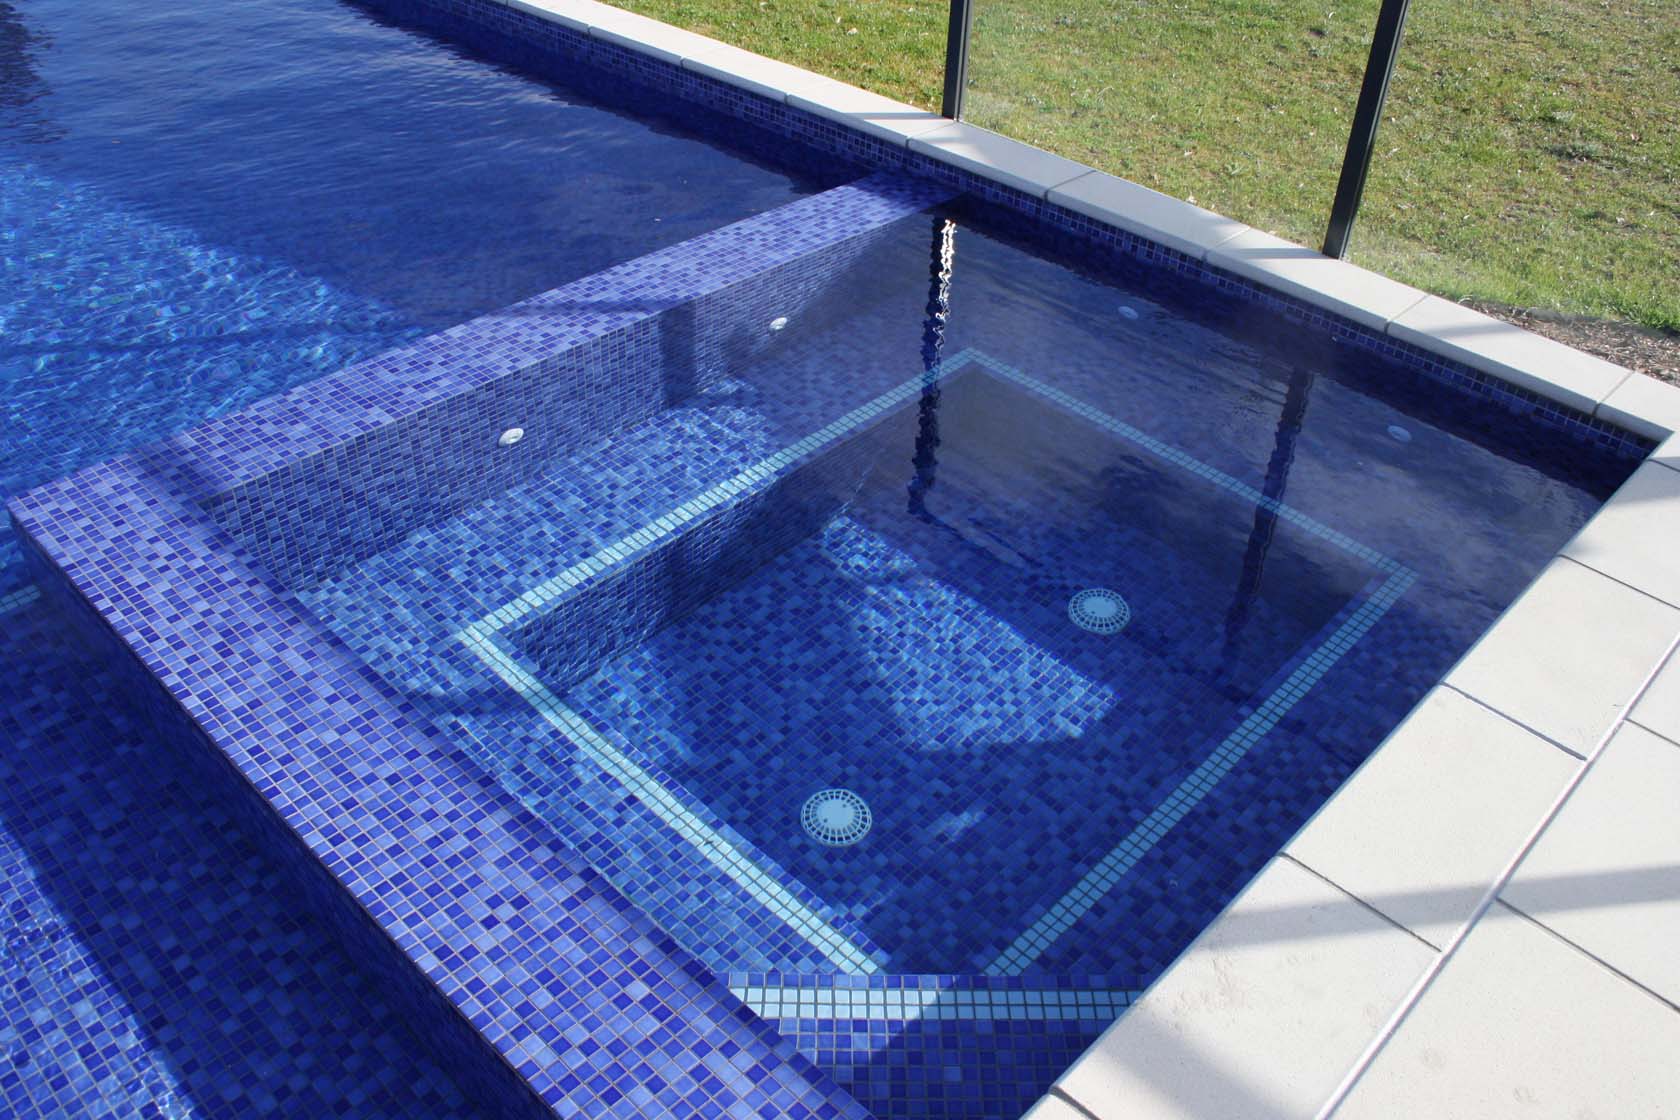 CMC300 Twilight Blue fully tiled pool and inner spa